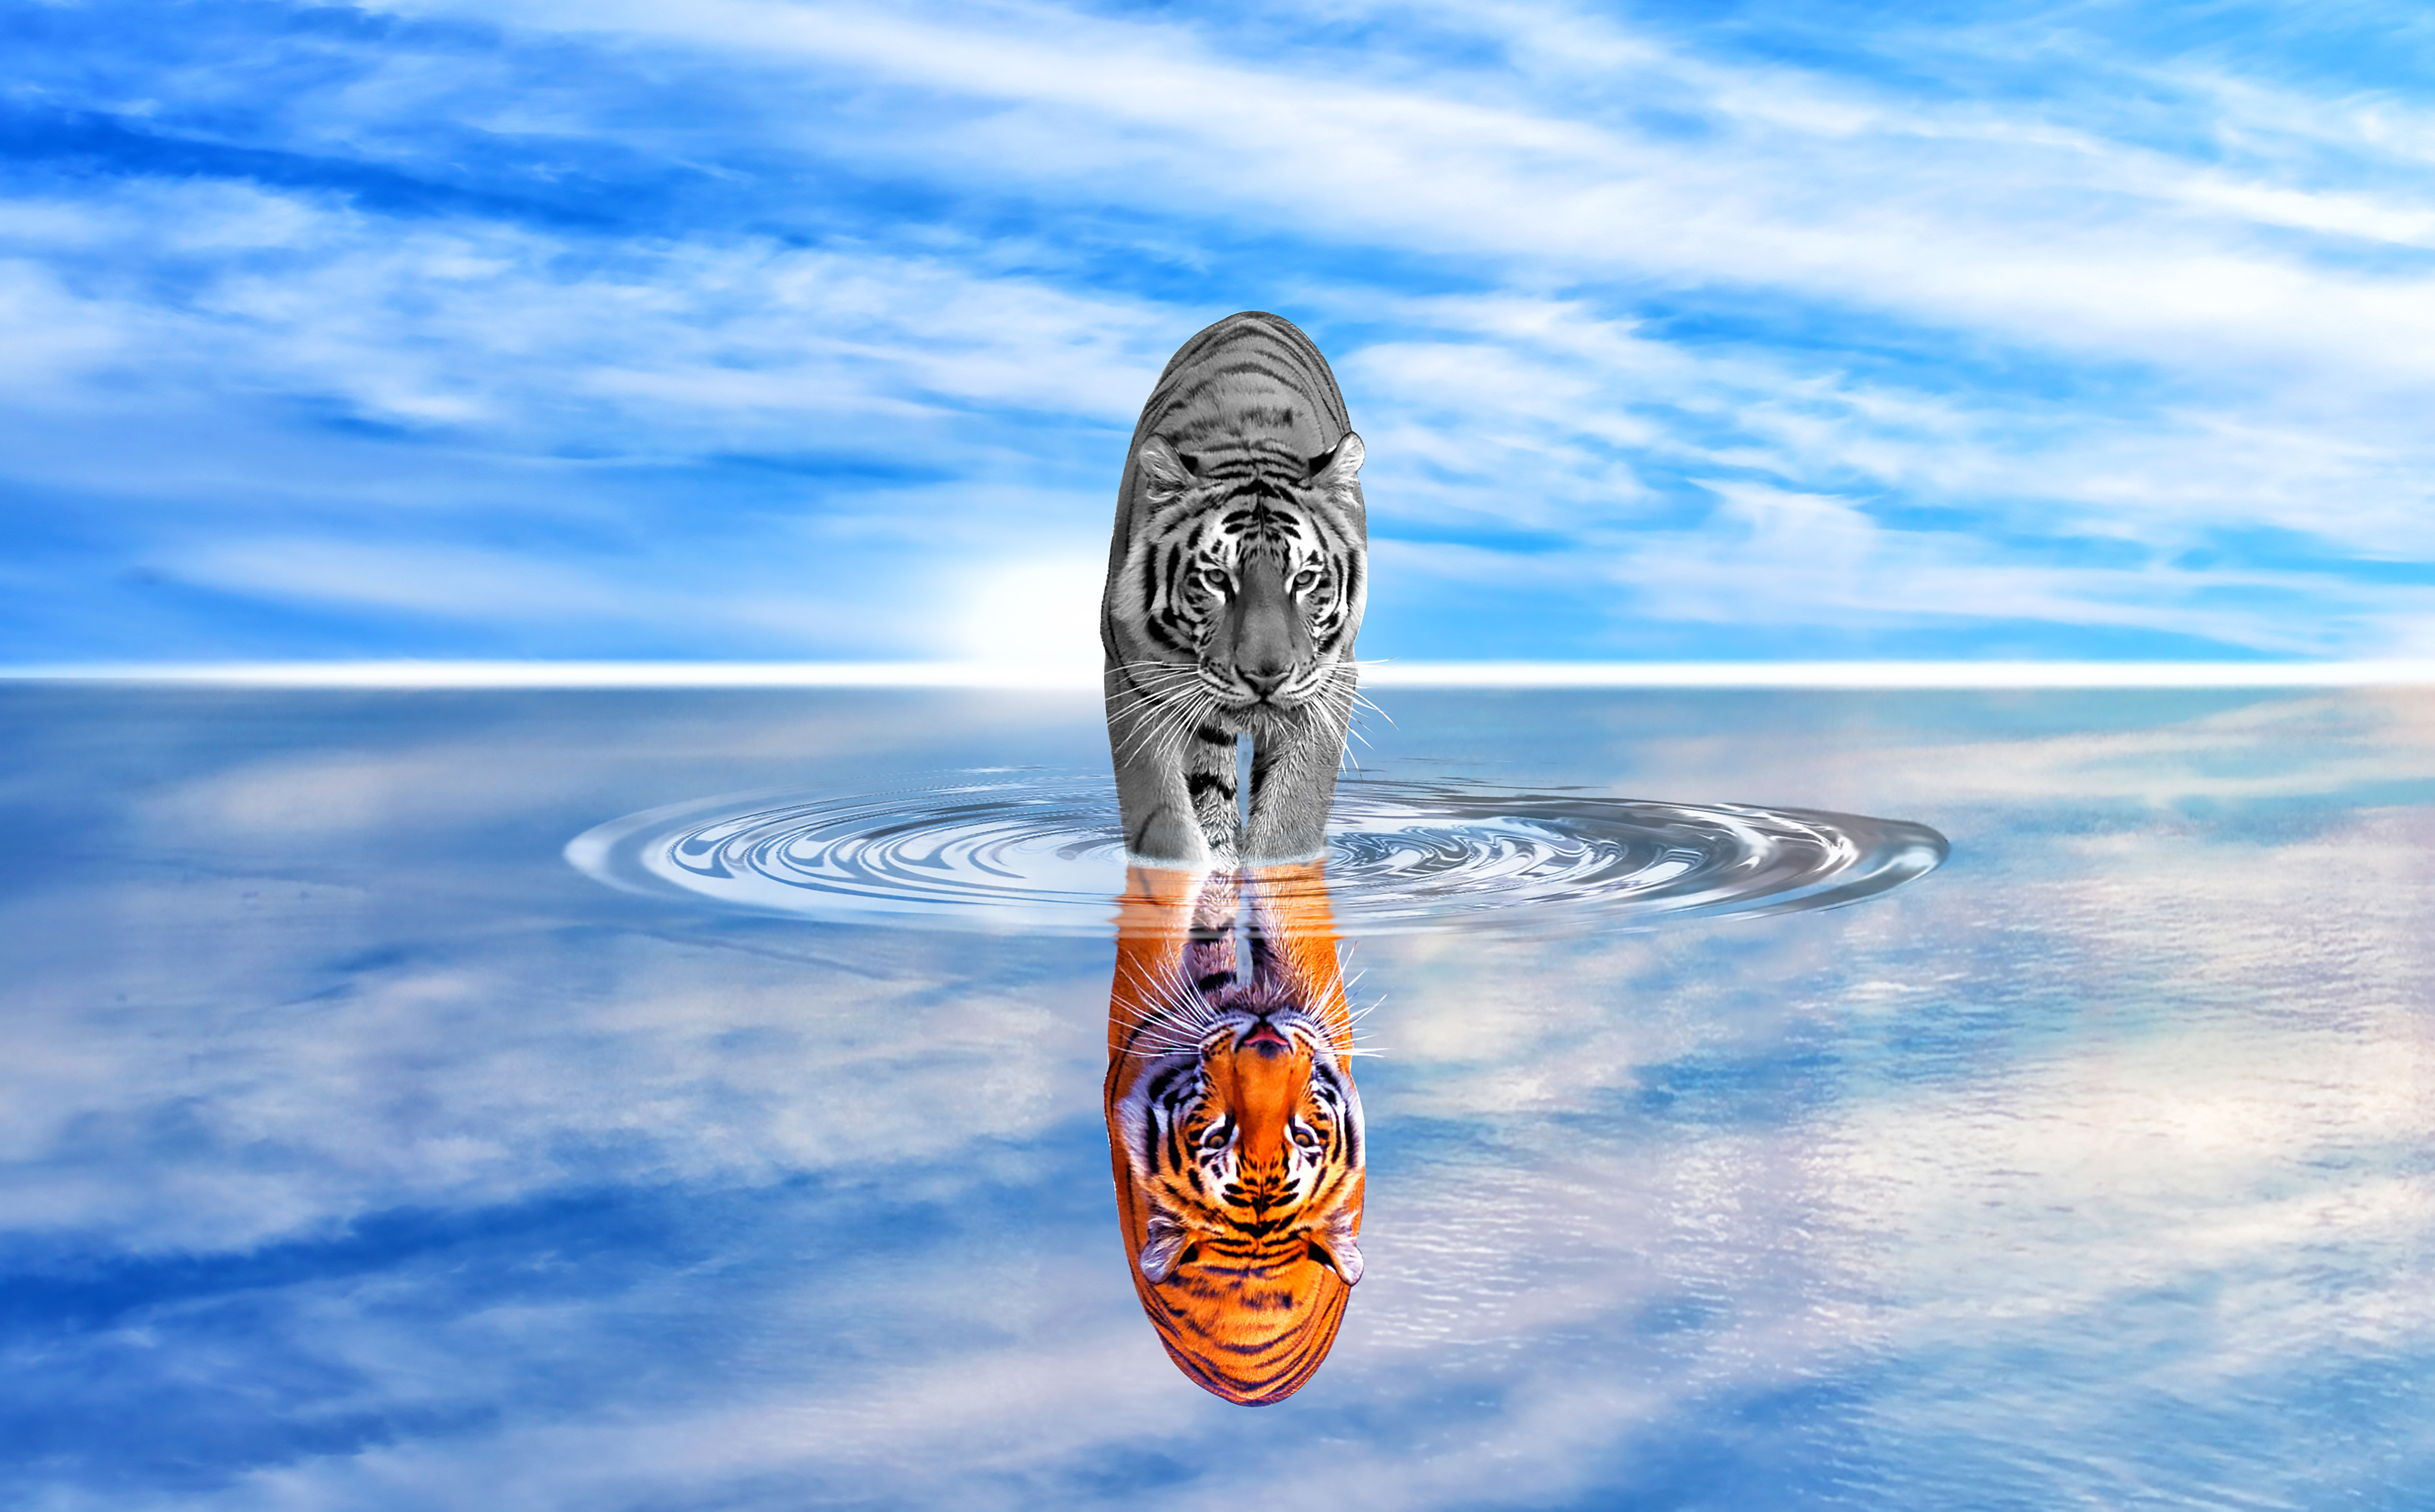 Ultra HD 4K water, reflection, tiger, photoshop